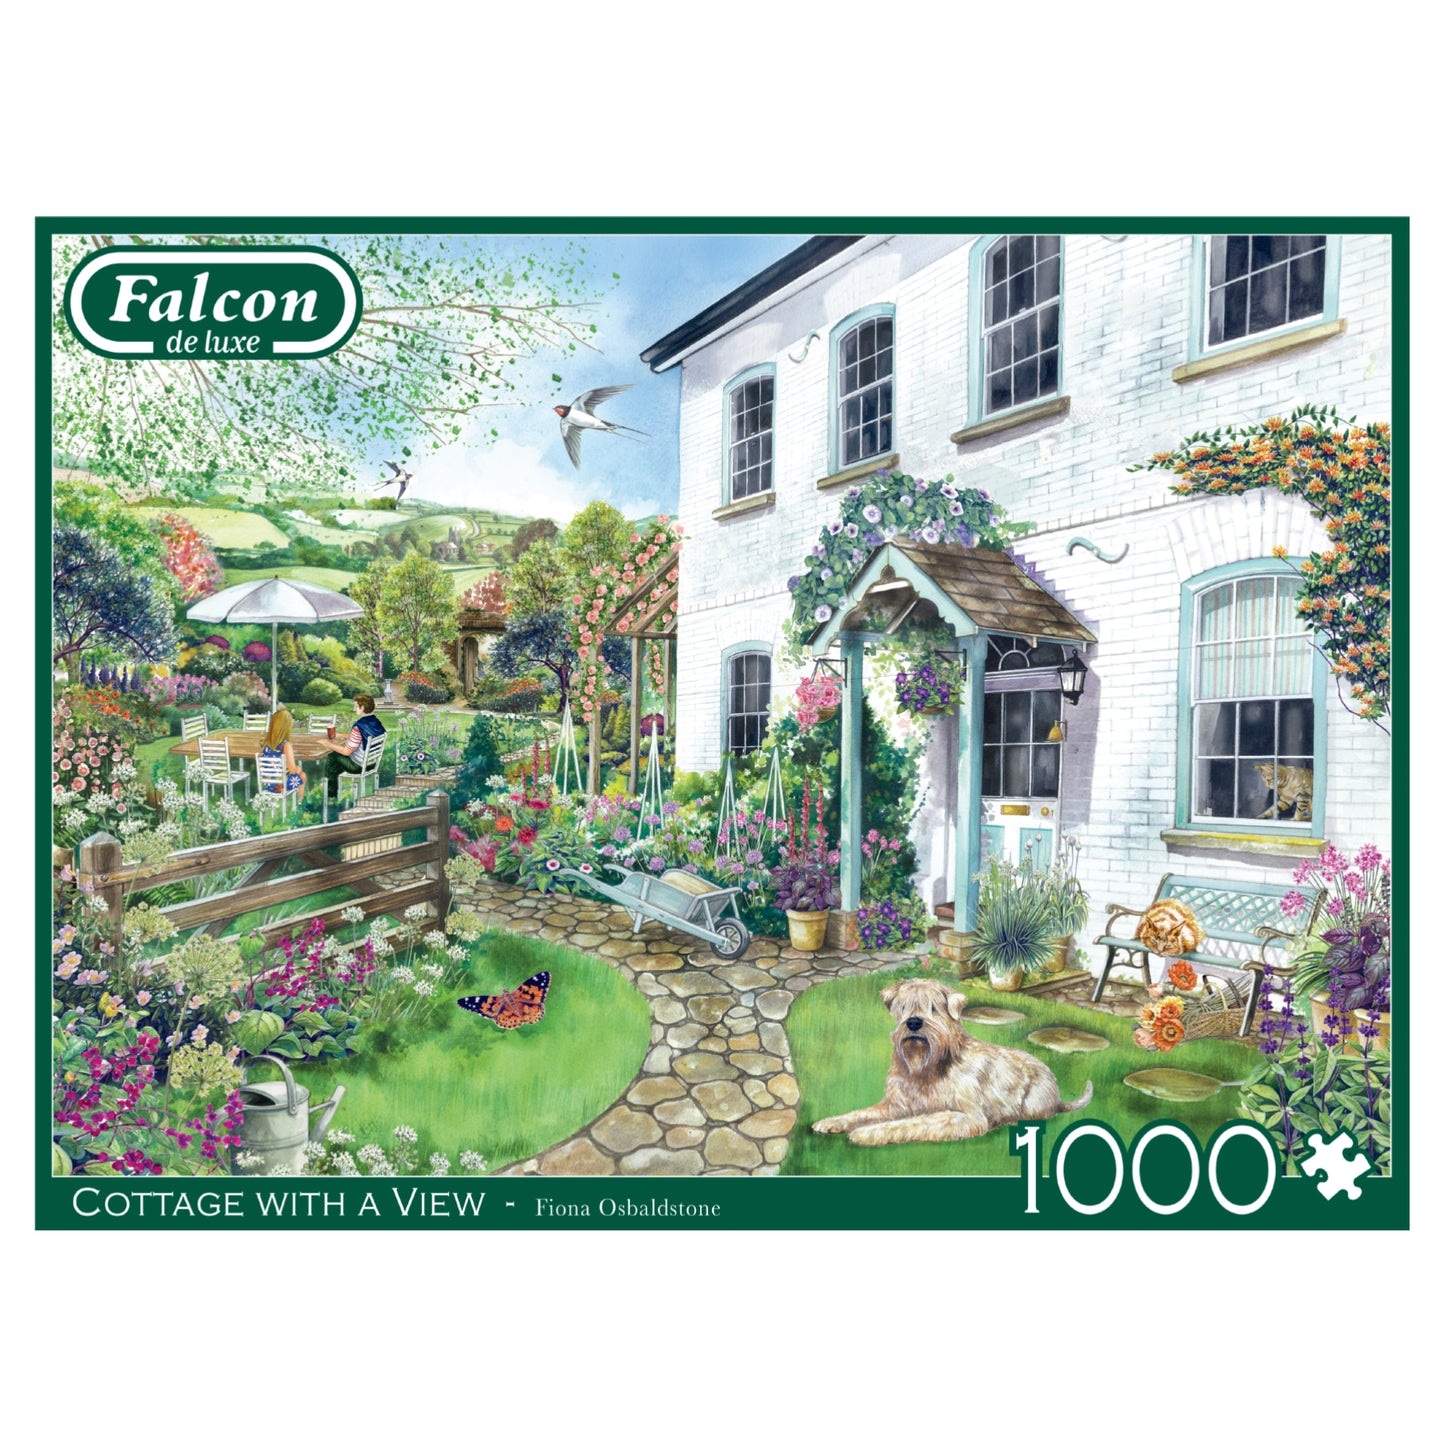 Falcon - Cottage with a View (1000 pieces) - product image - Jumboplay.com